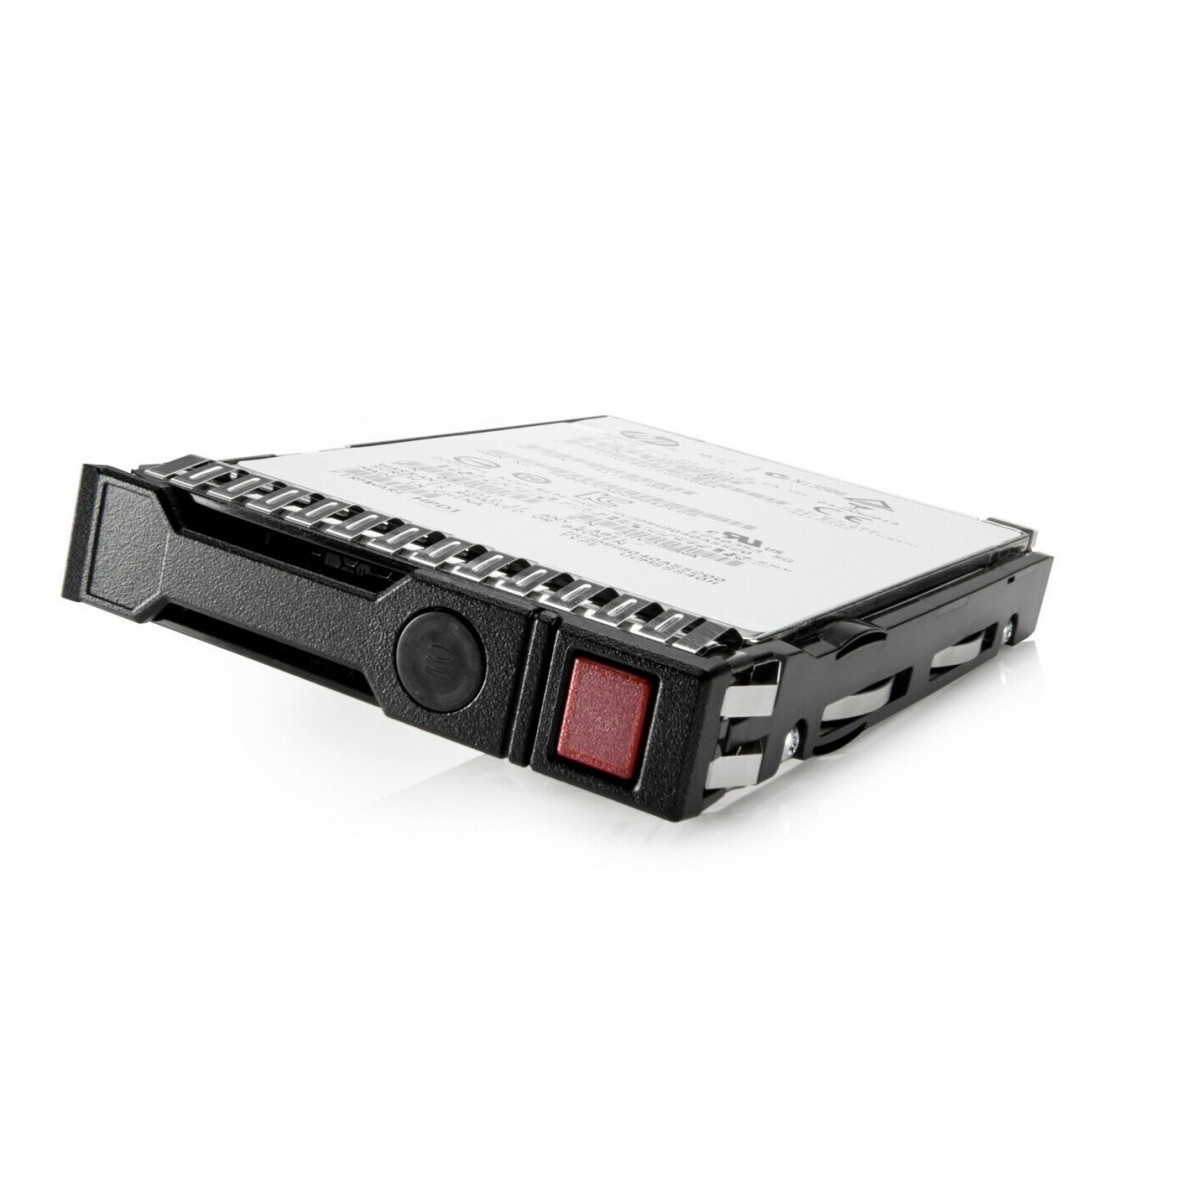 HPE SSD 480Gb SATA 6G SFF Mixed Use Spare Part - Solid State Disk - Serial ATA